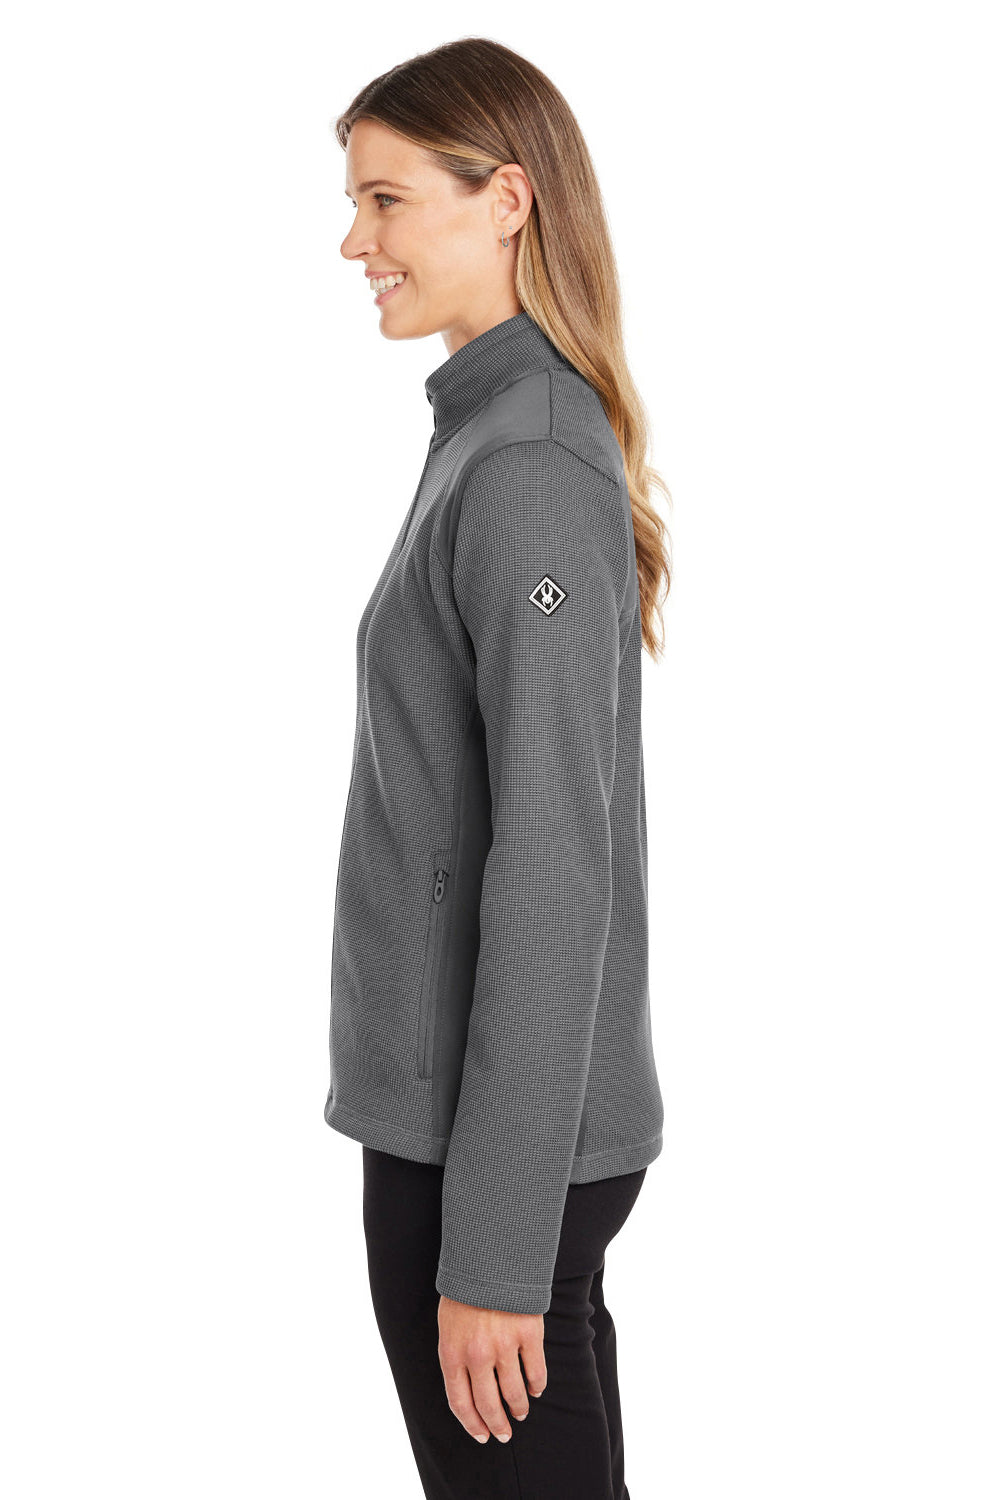 Spyder S17937 Womens Constant Canyon Full Zip Sweater Jacket Polar Grey Side